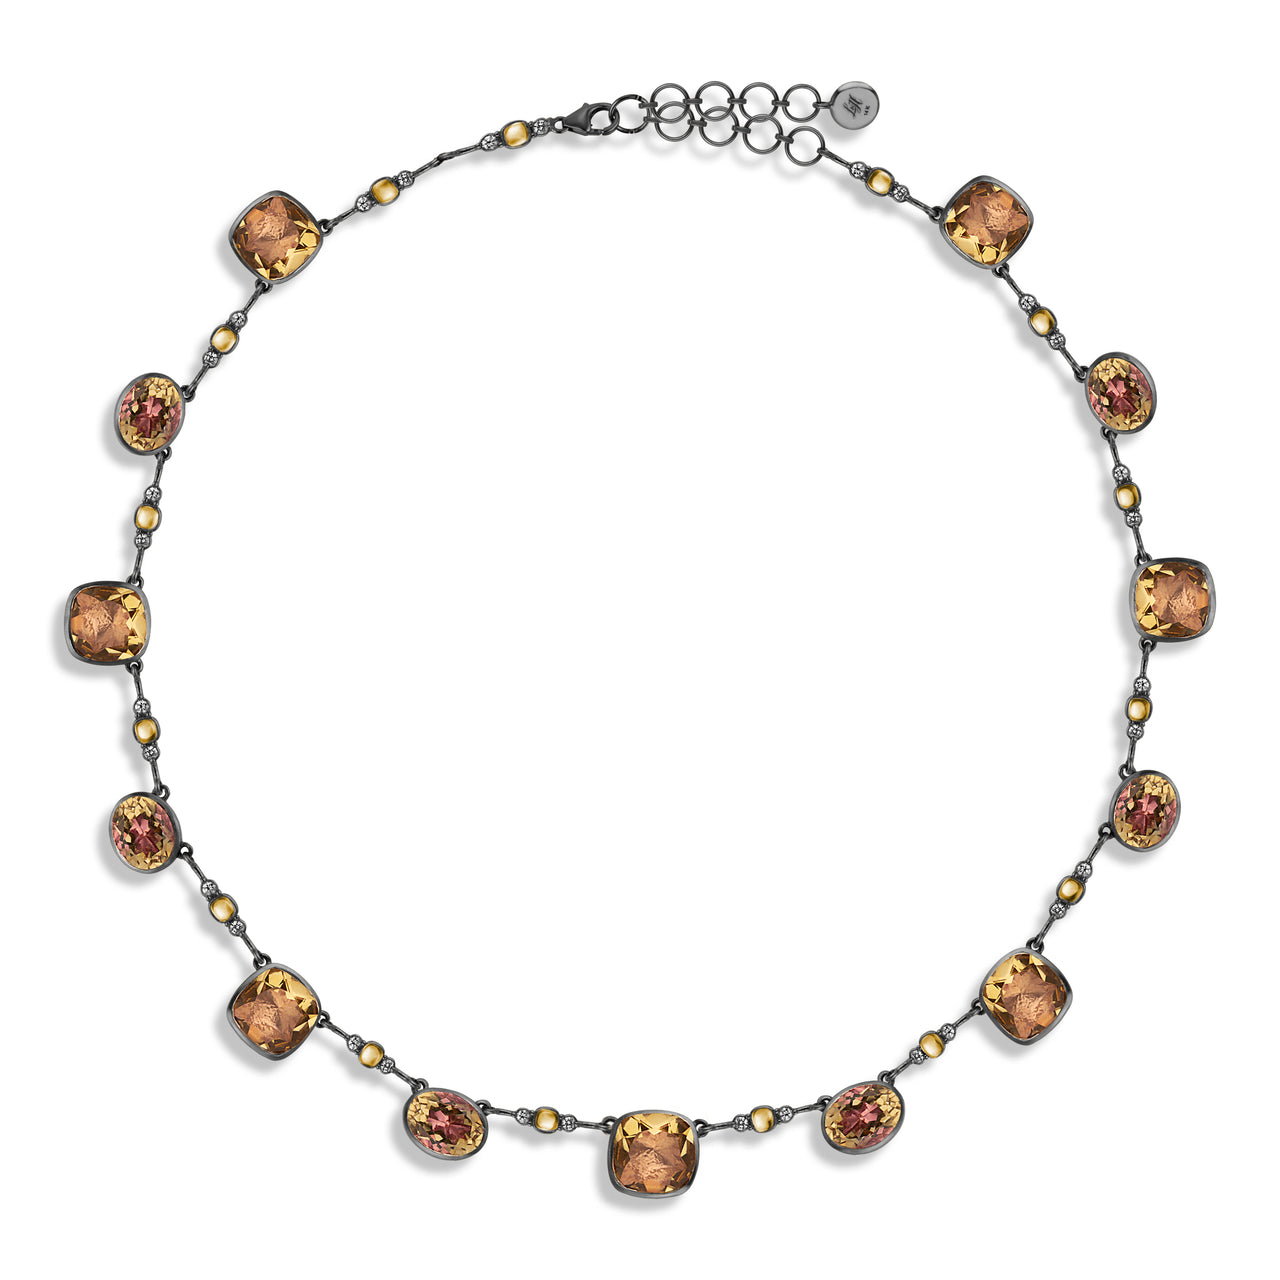 Luzia Cushion Oval Necklace in Yellow Citrine